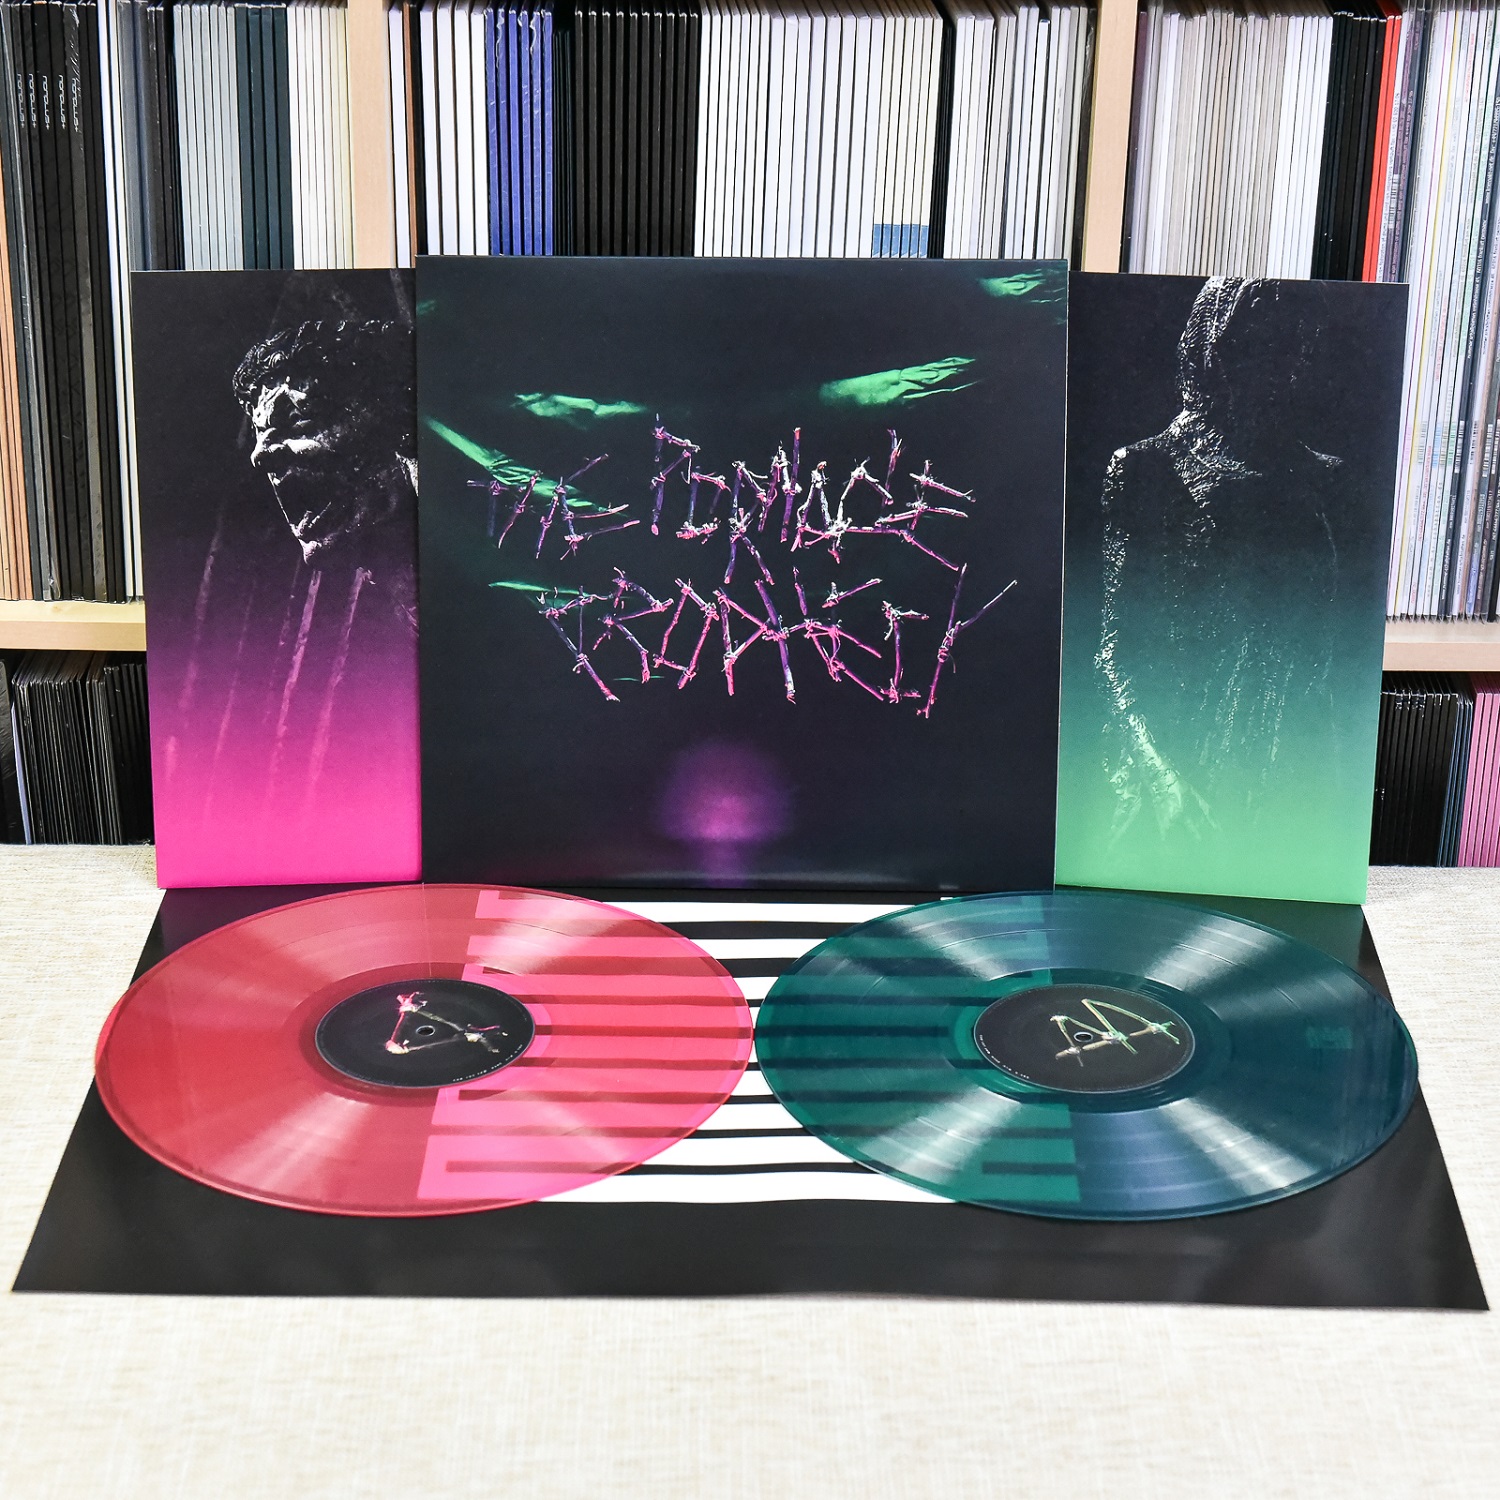 Anacle "The Pornacle Prophecy" - Album [Green & Pink transparent double vinyl LP / CD Cardsleeve / Green & Pink transparent double vinyl LP + CD Cardsleeve]